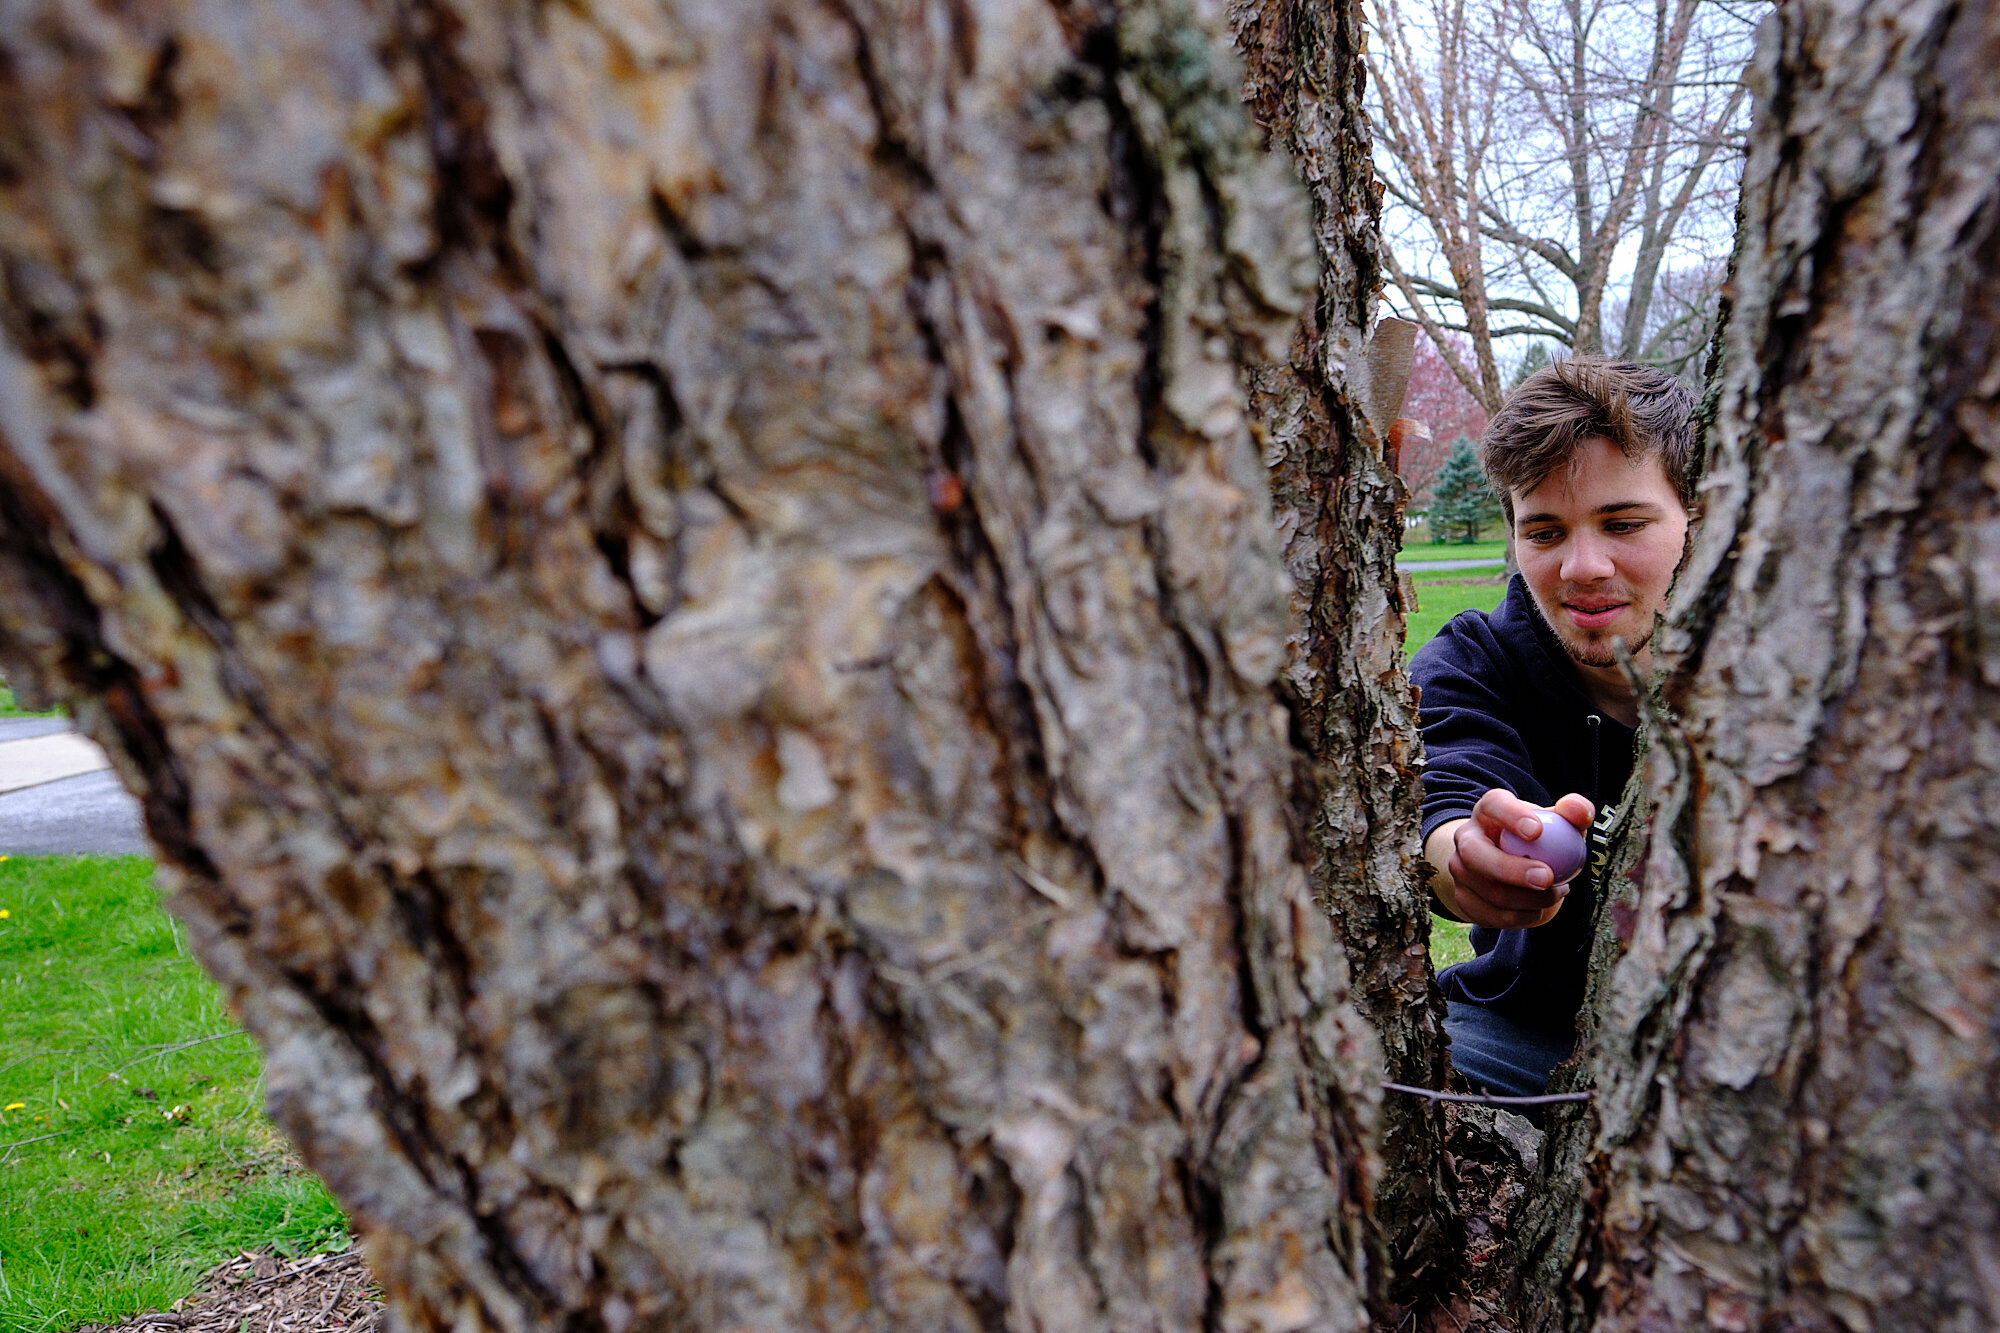  The annual family egg hunt took to the outdoors this year. Here Gabriel pulls one from a Paper Birch tree. | 4/13/20 Westlake, OH 